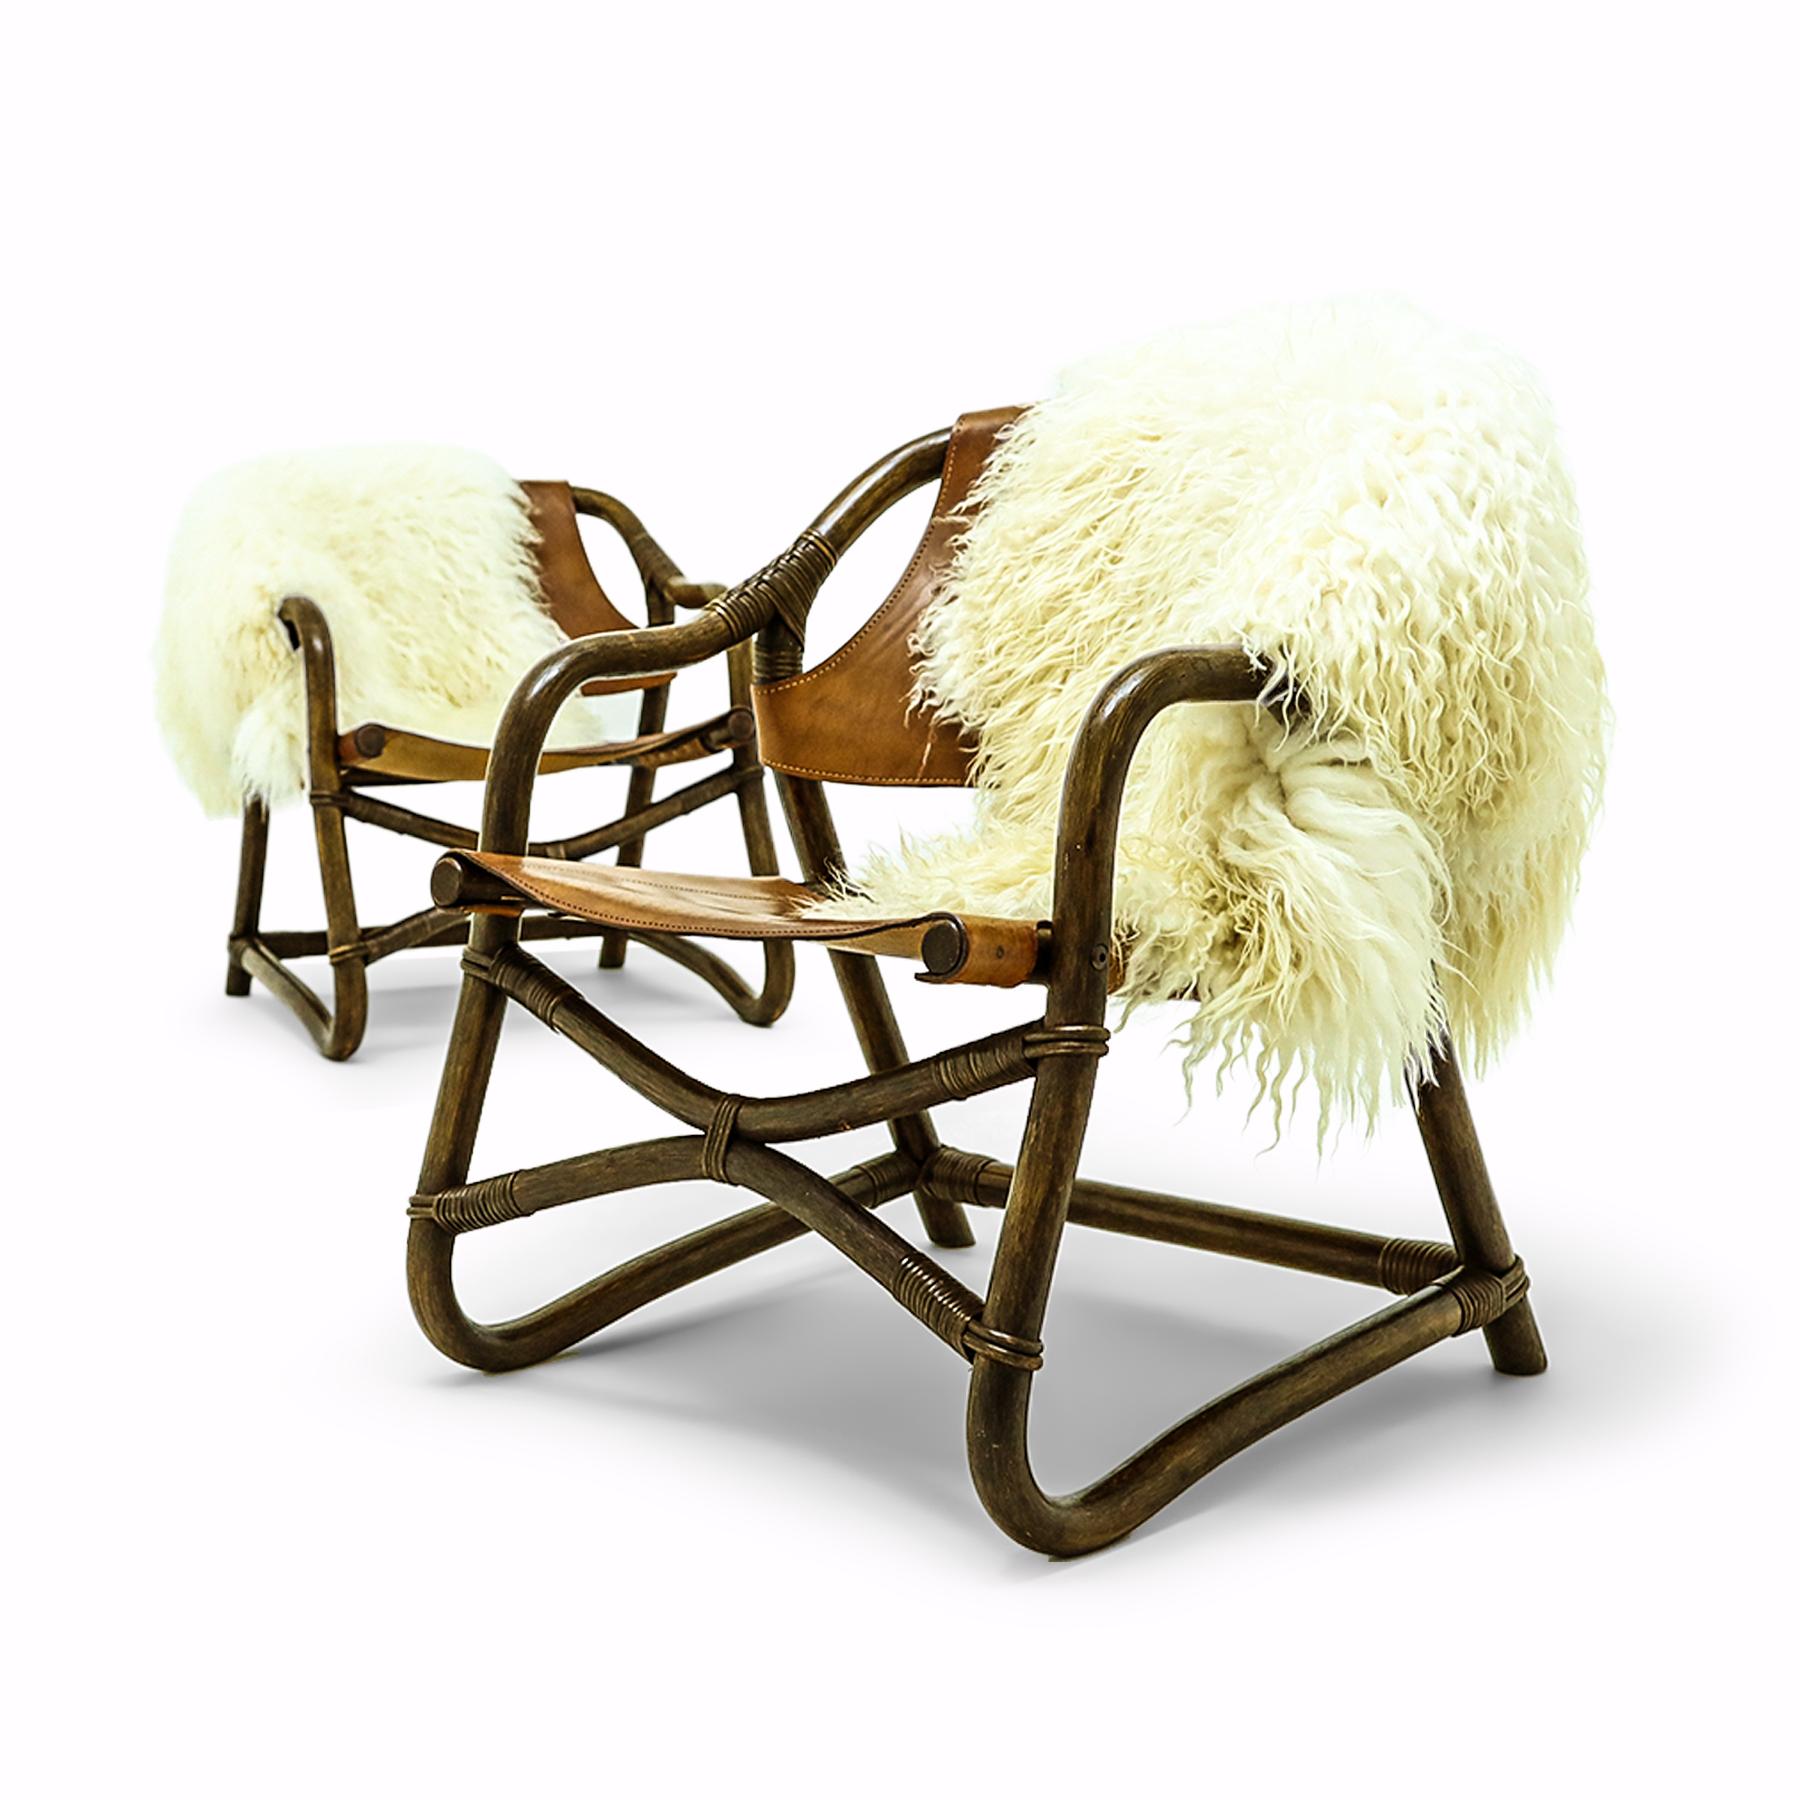 Welcome to Valhalla! Very Nordic in style this pair of chairs features thick leather seats and backs, on bound cane supports with long haired Icelandic sheepskin throws – both throws are included in the price of the set. 

These chairs have been